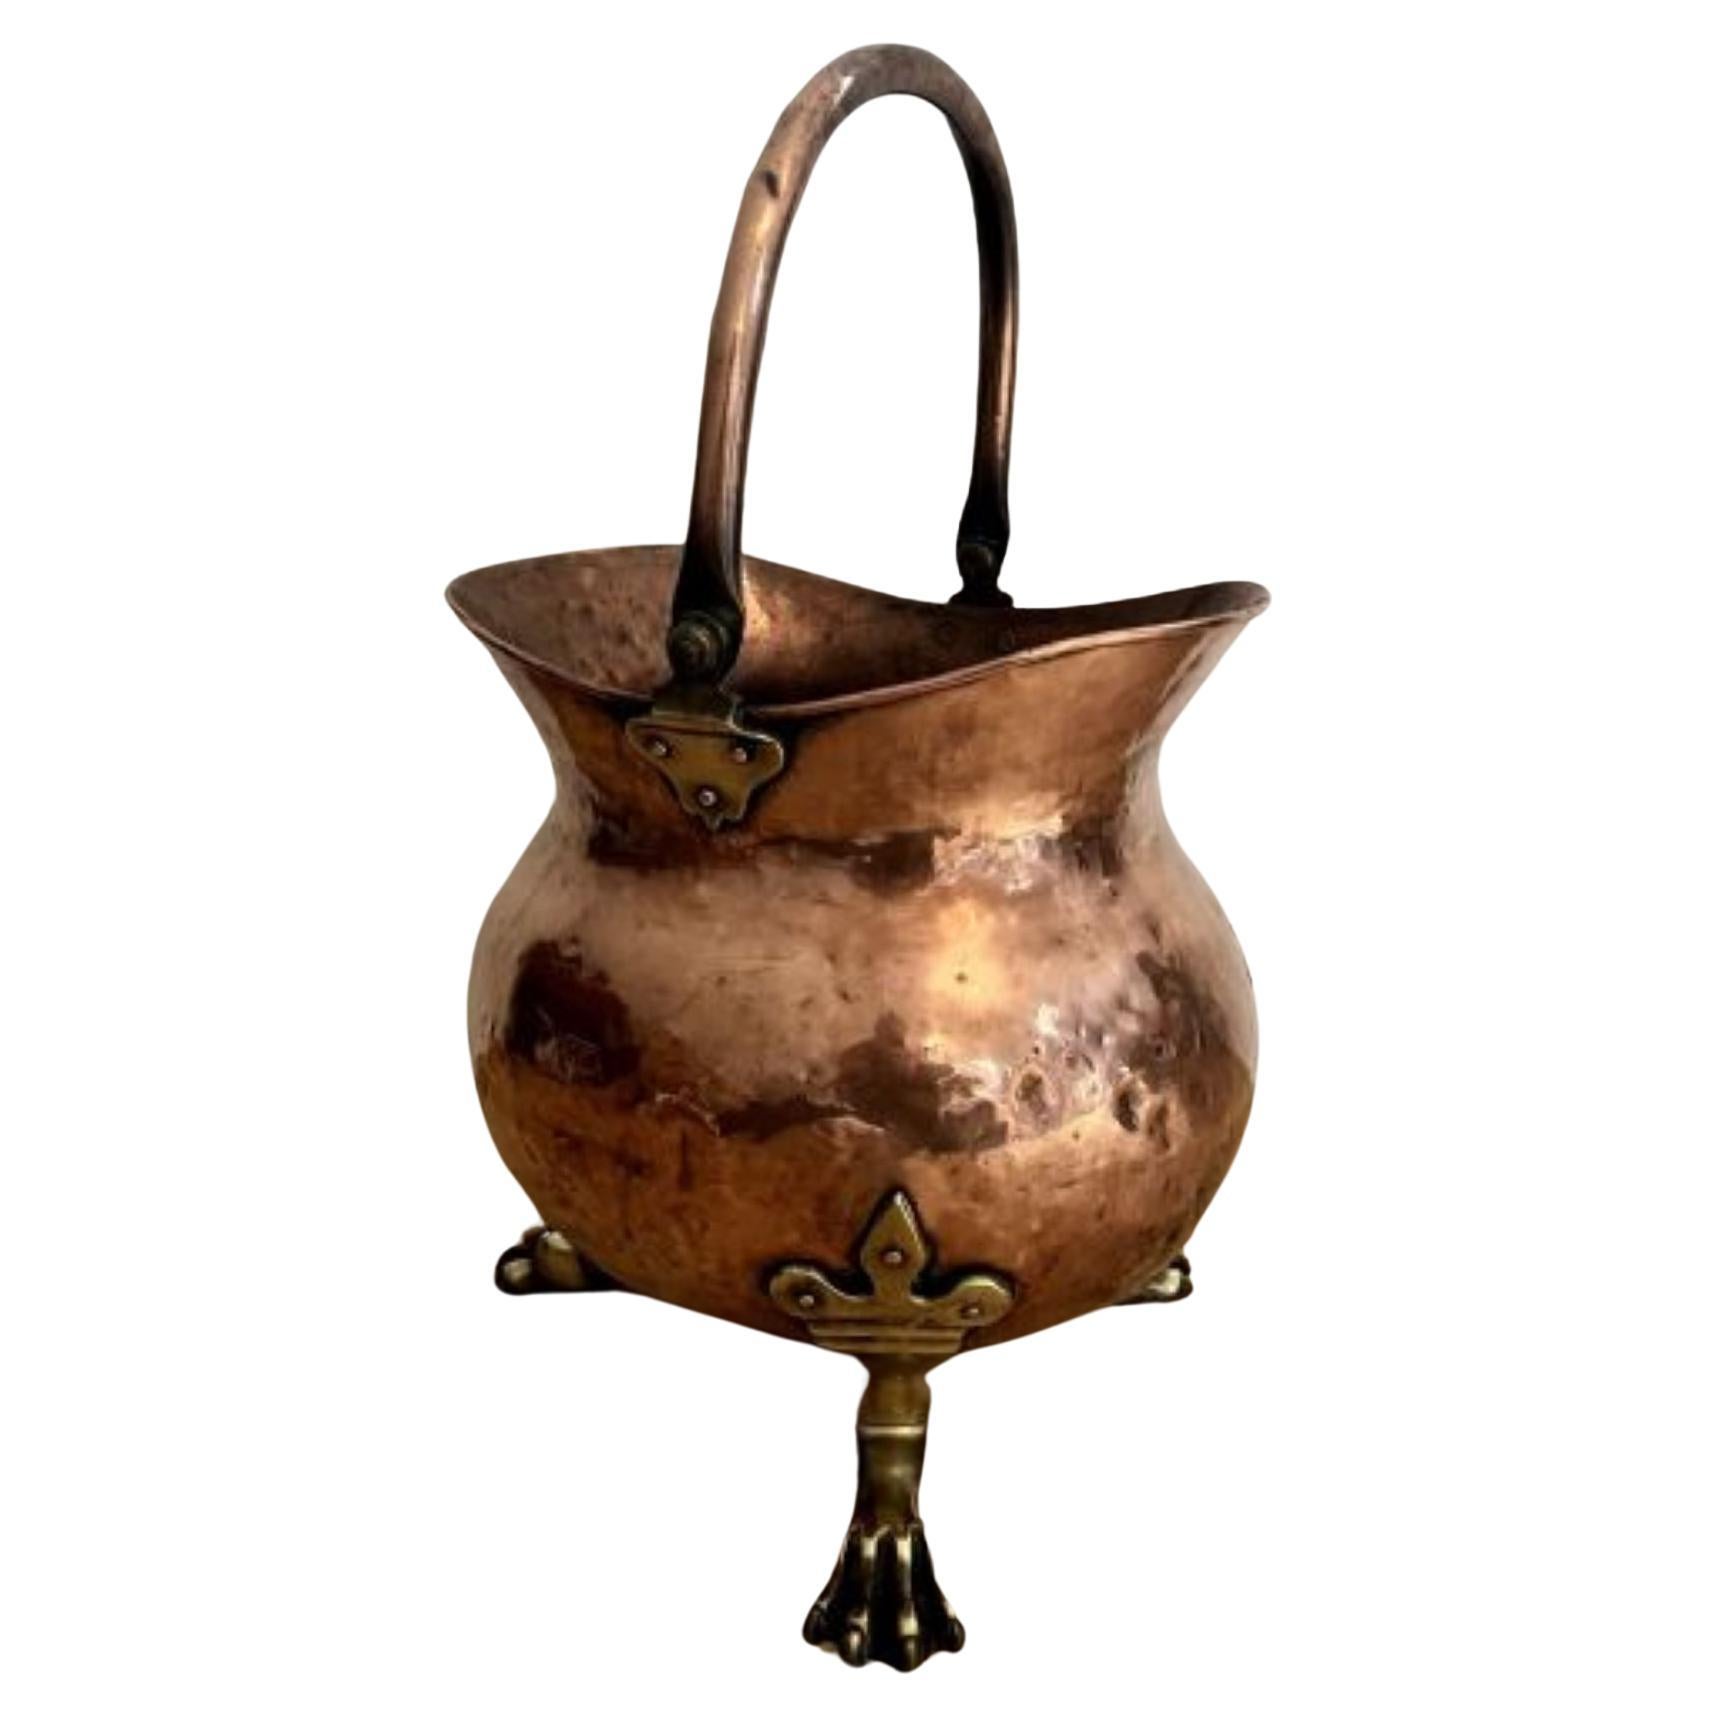 Outstanding quality antique Victorian large copper coal scuttle 